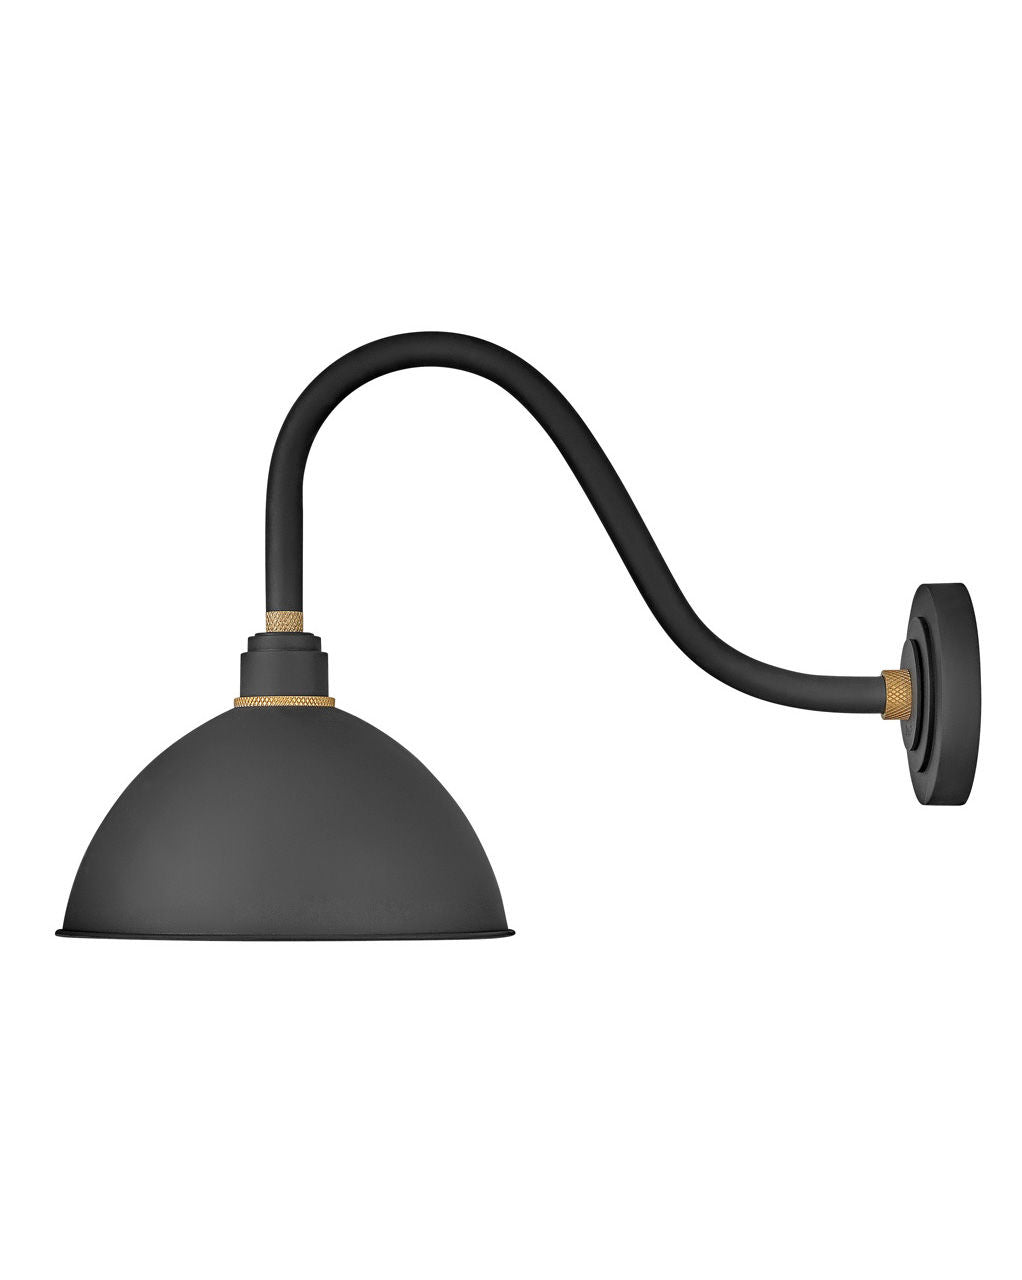 OUTDOOR FOUNDRY DOME Gooseneck Barn Light Outdoor l Wall Hinkley Textured Black 24.0x12.0x17.0 